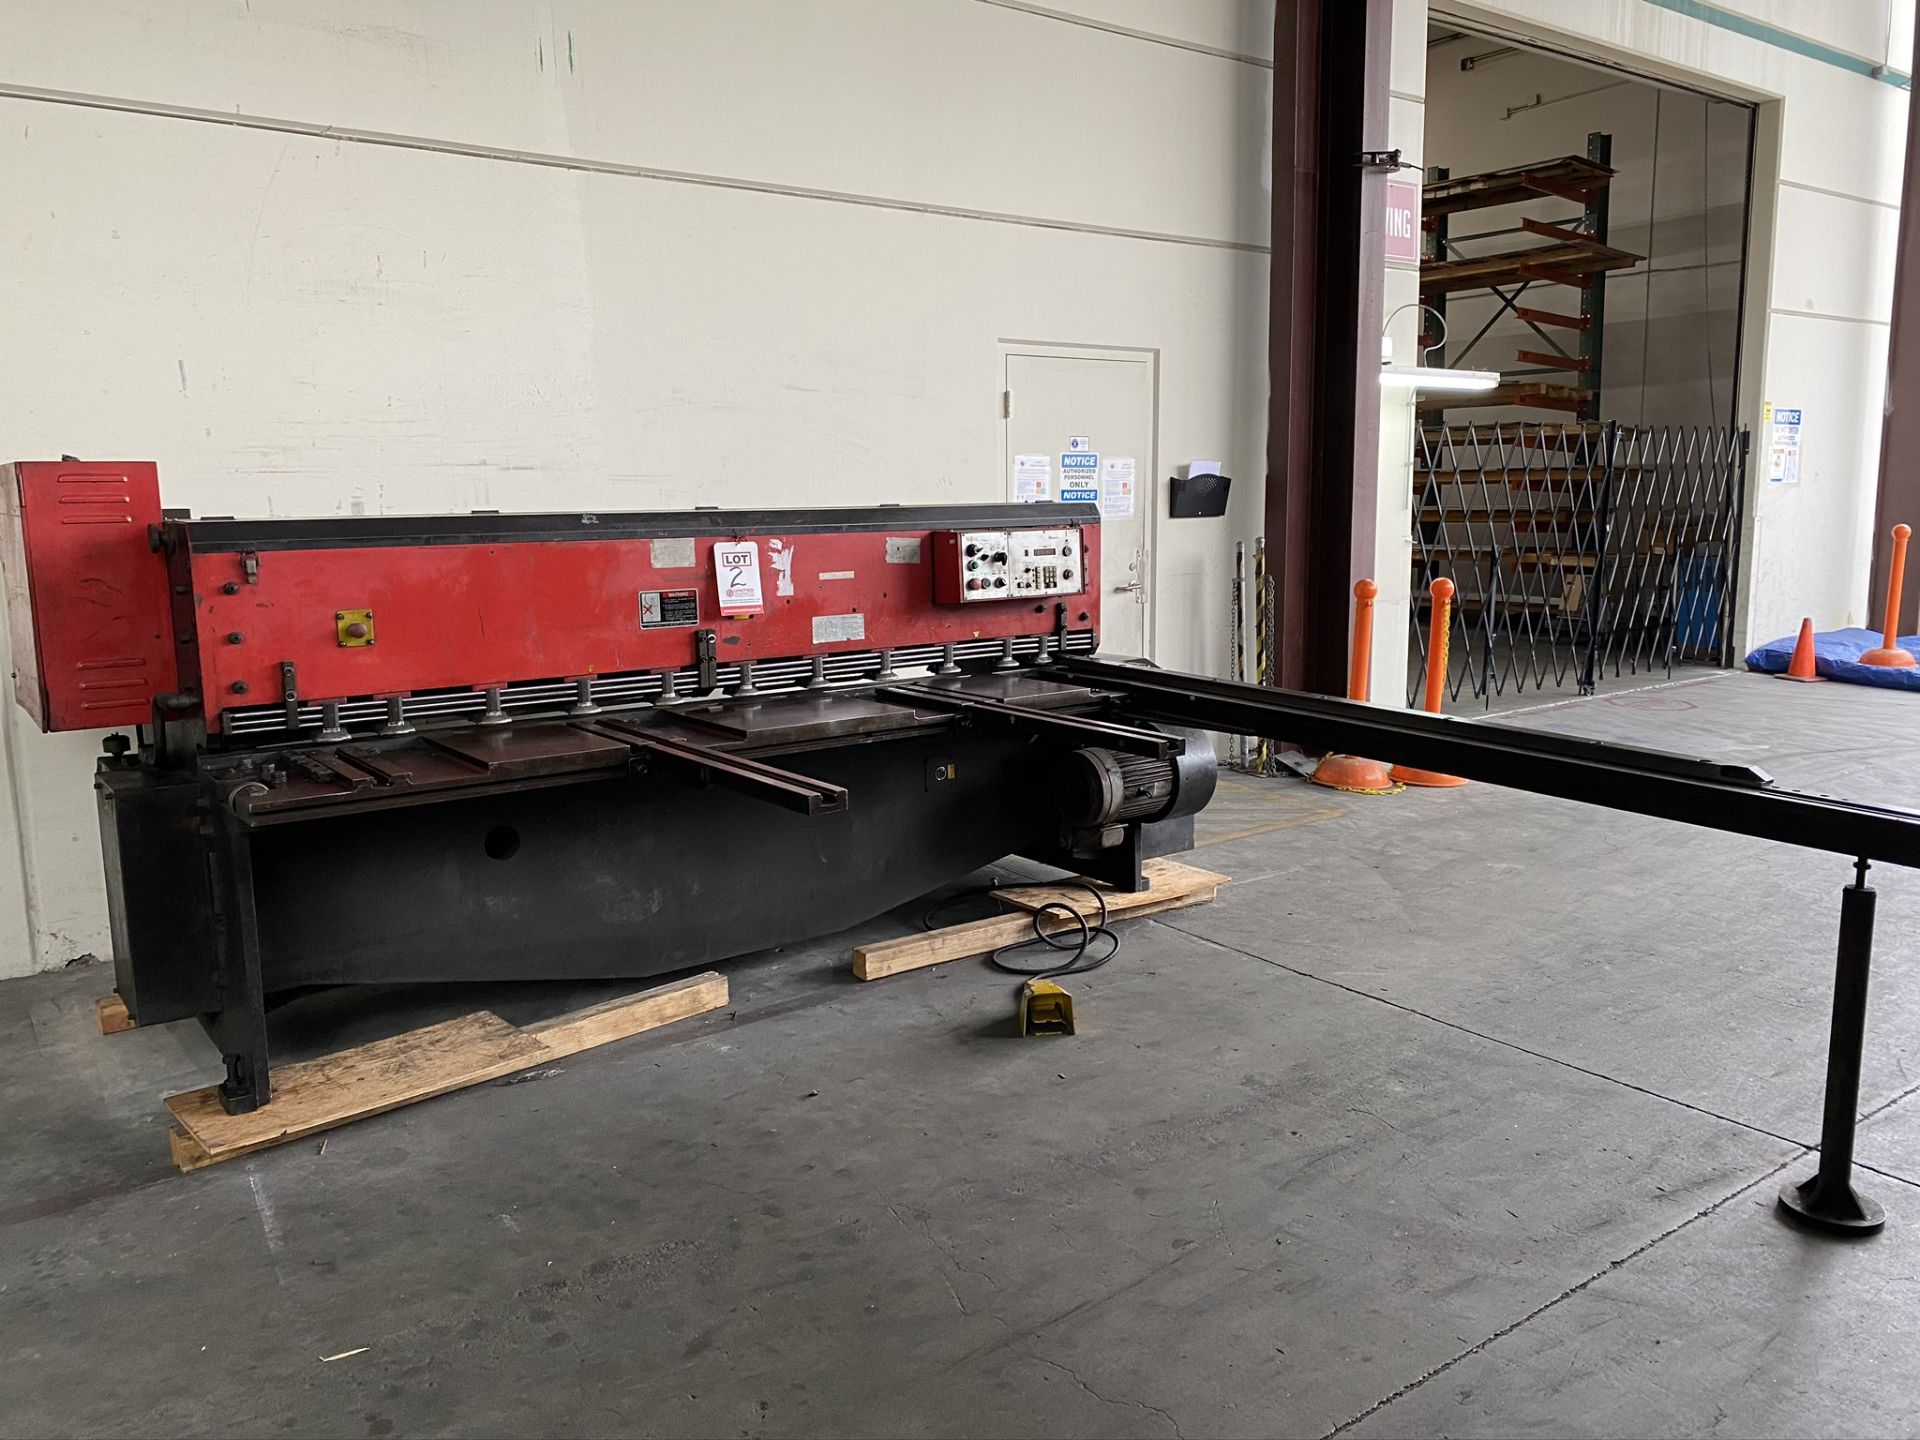 1990 AMADA M-2560 SHEAR, 2500 MM, LENGTH, 6 MM THICKNESS, MECHANICAL, SHEET SUPPORTS